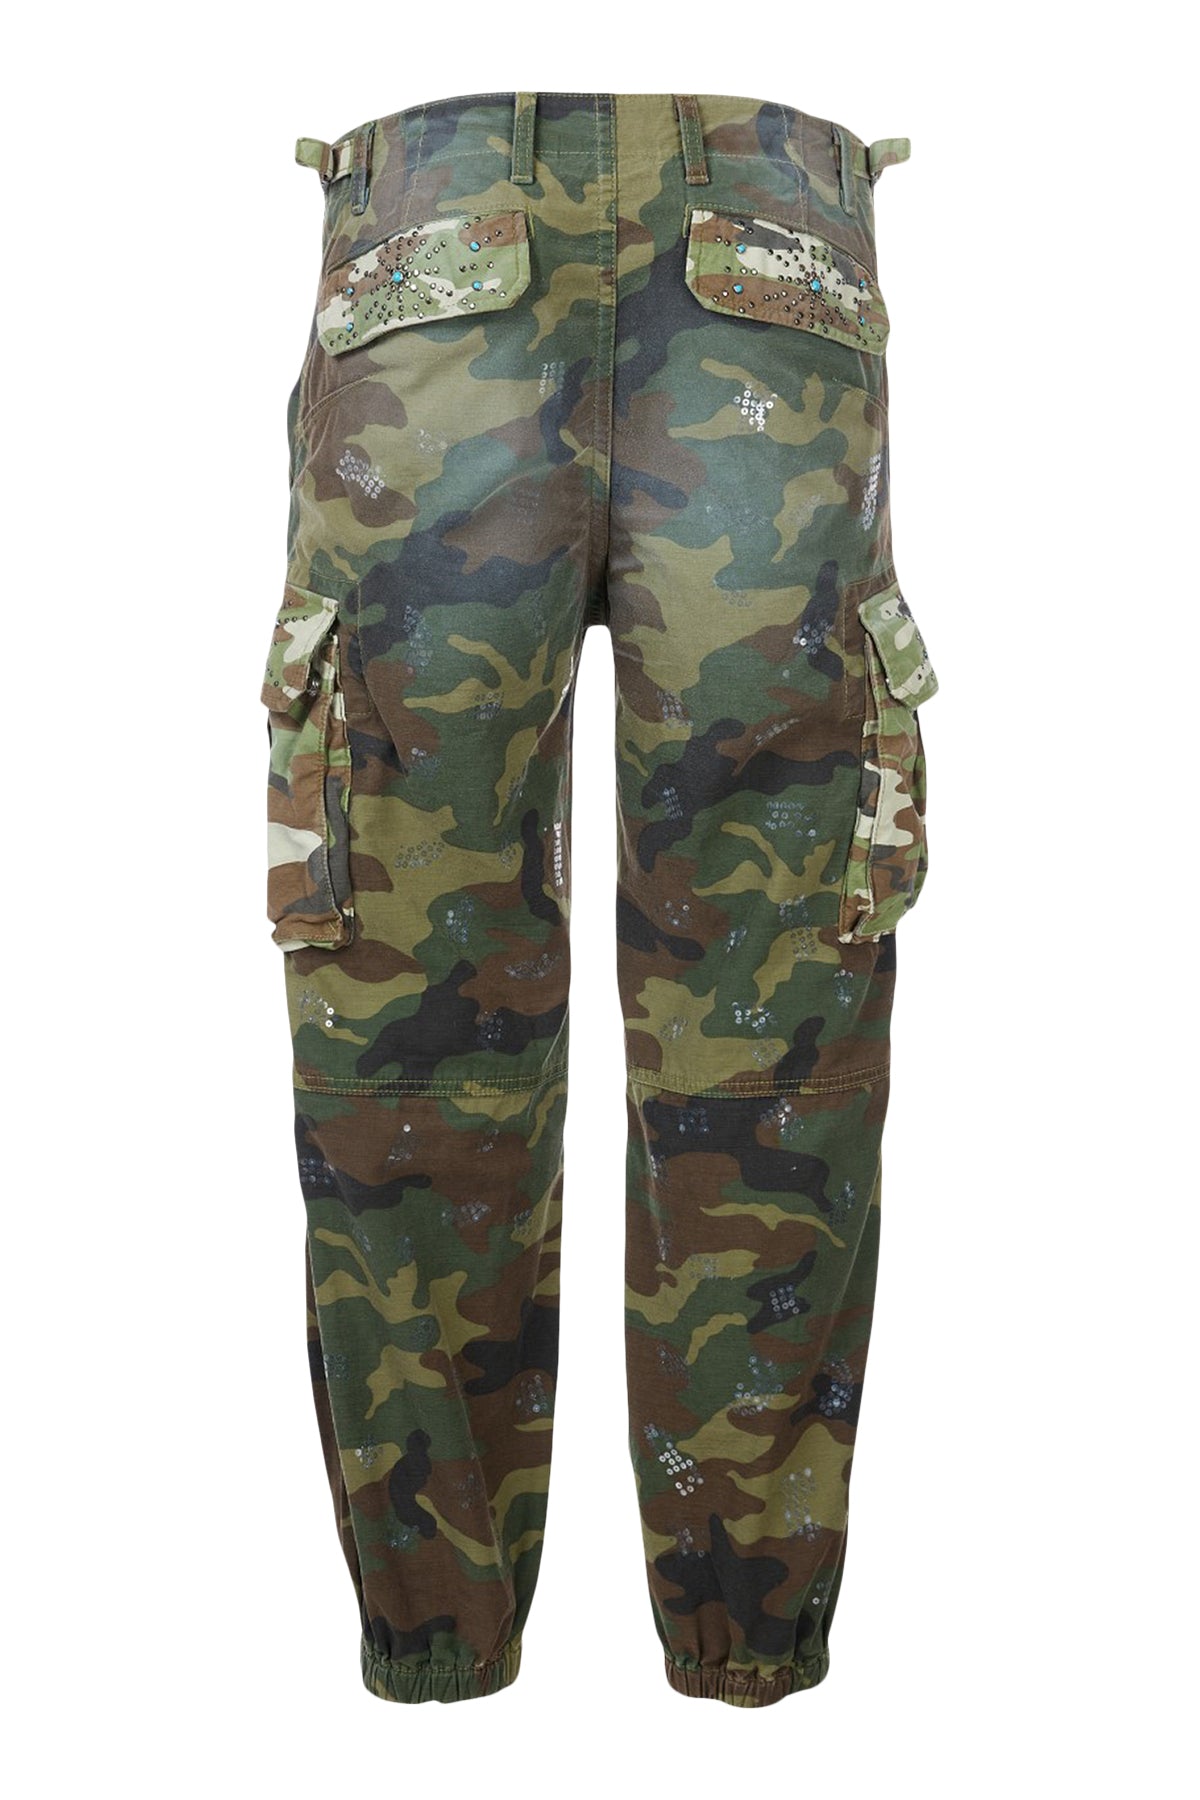 Sylvester/Embellished Camo Military Pants